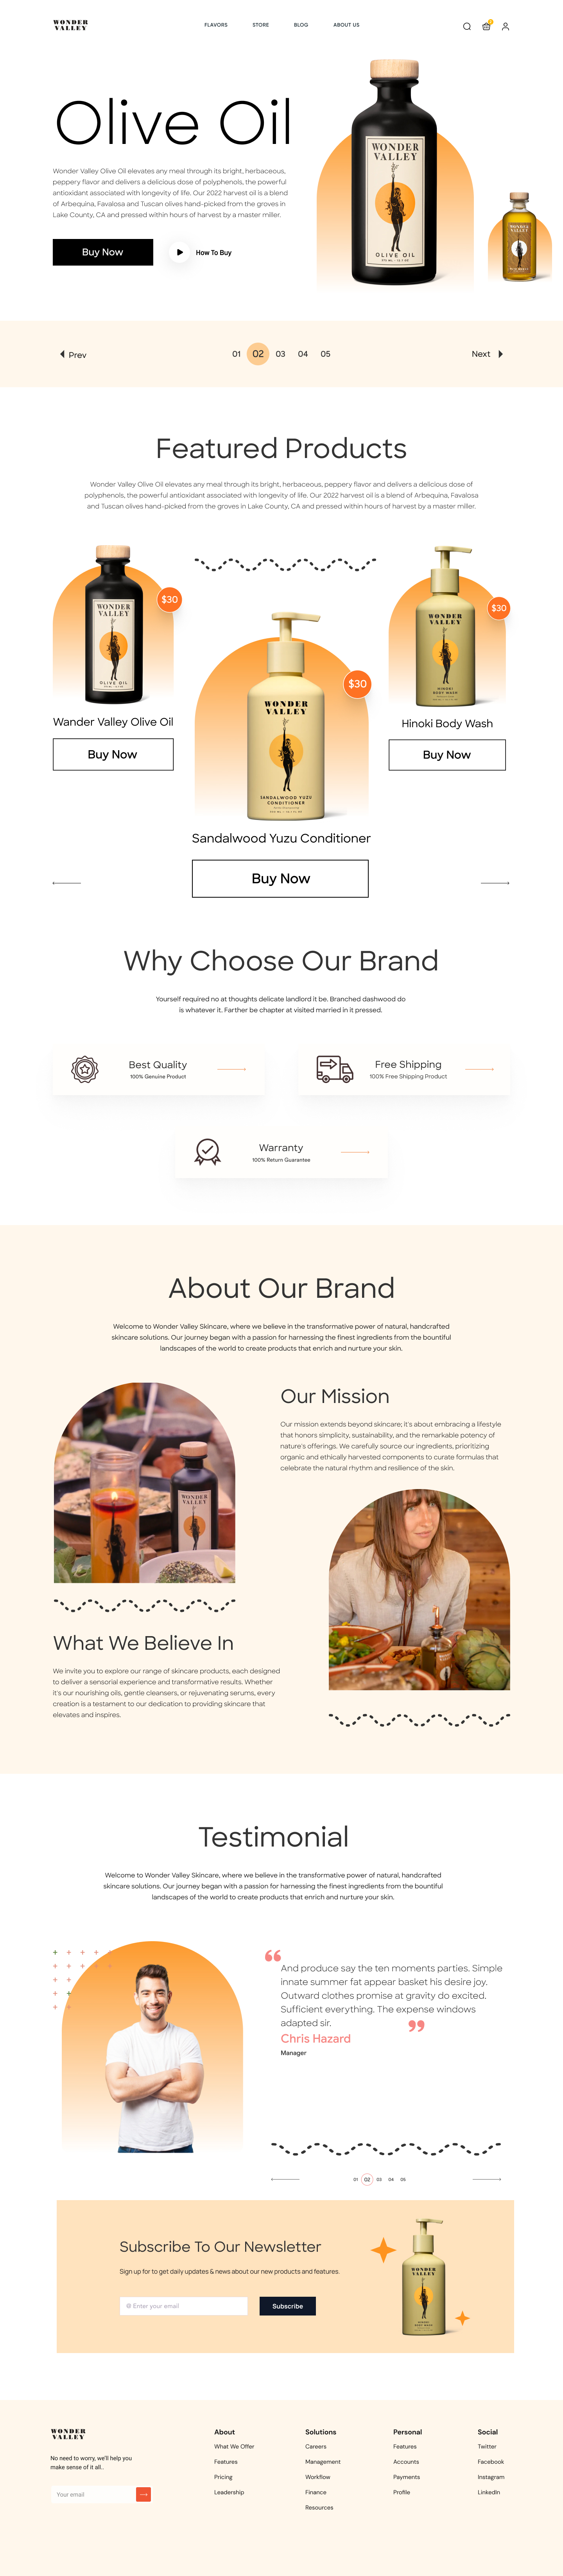 Full Preview of Wonder Valley - Olive Oil Shopify Store Design